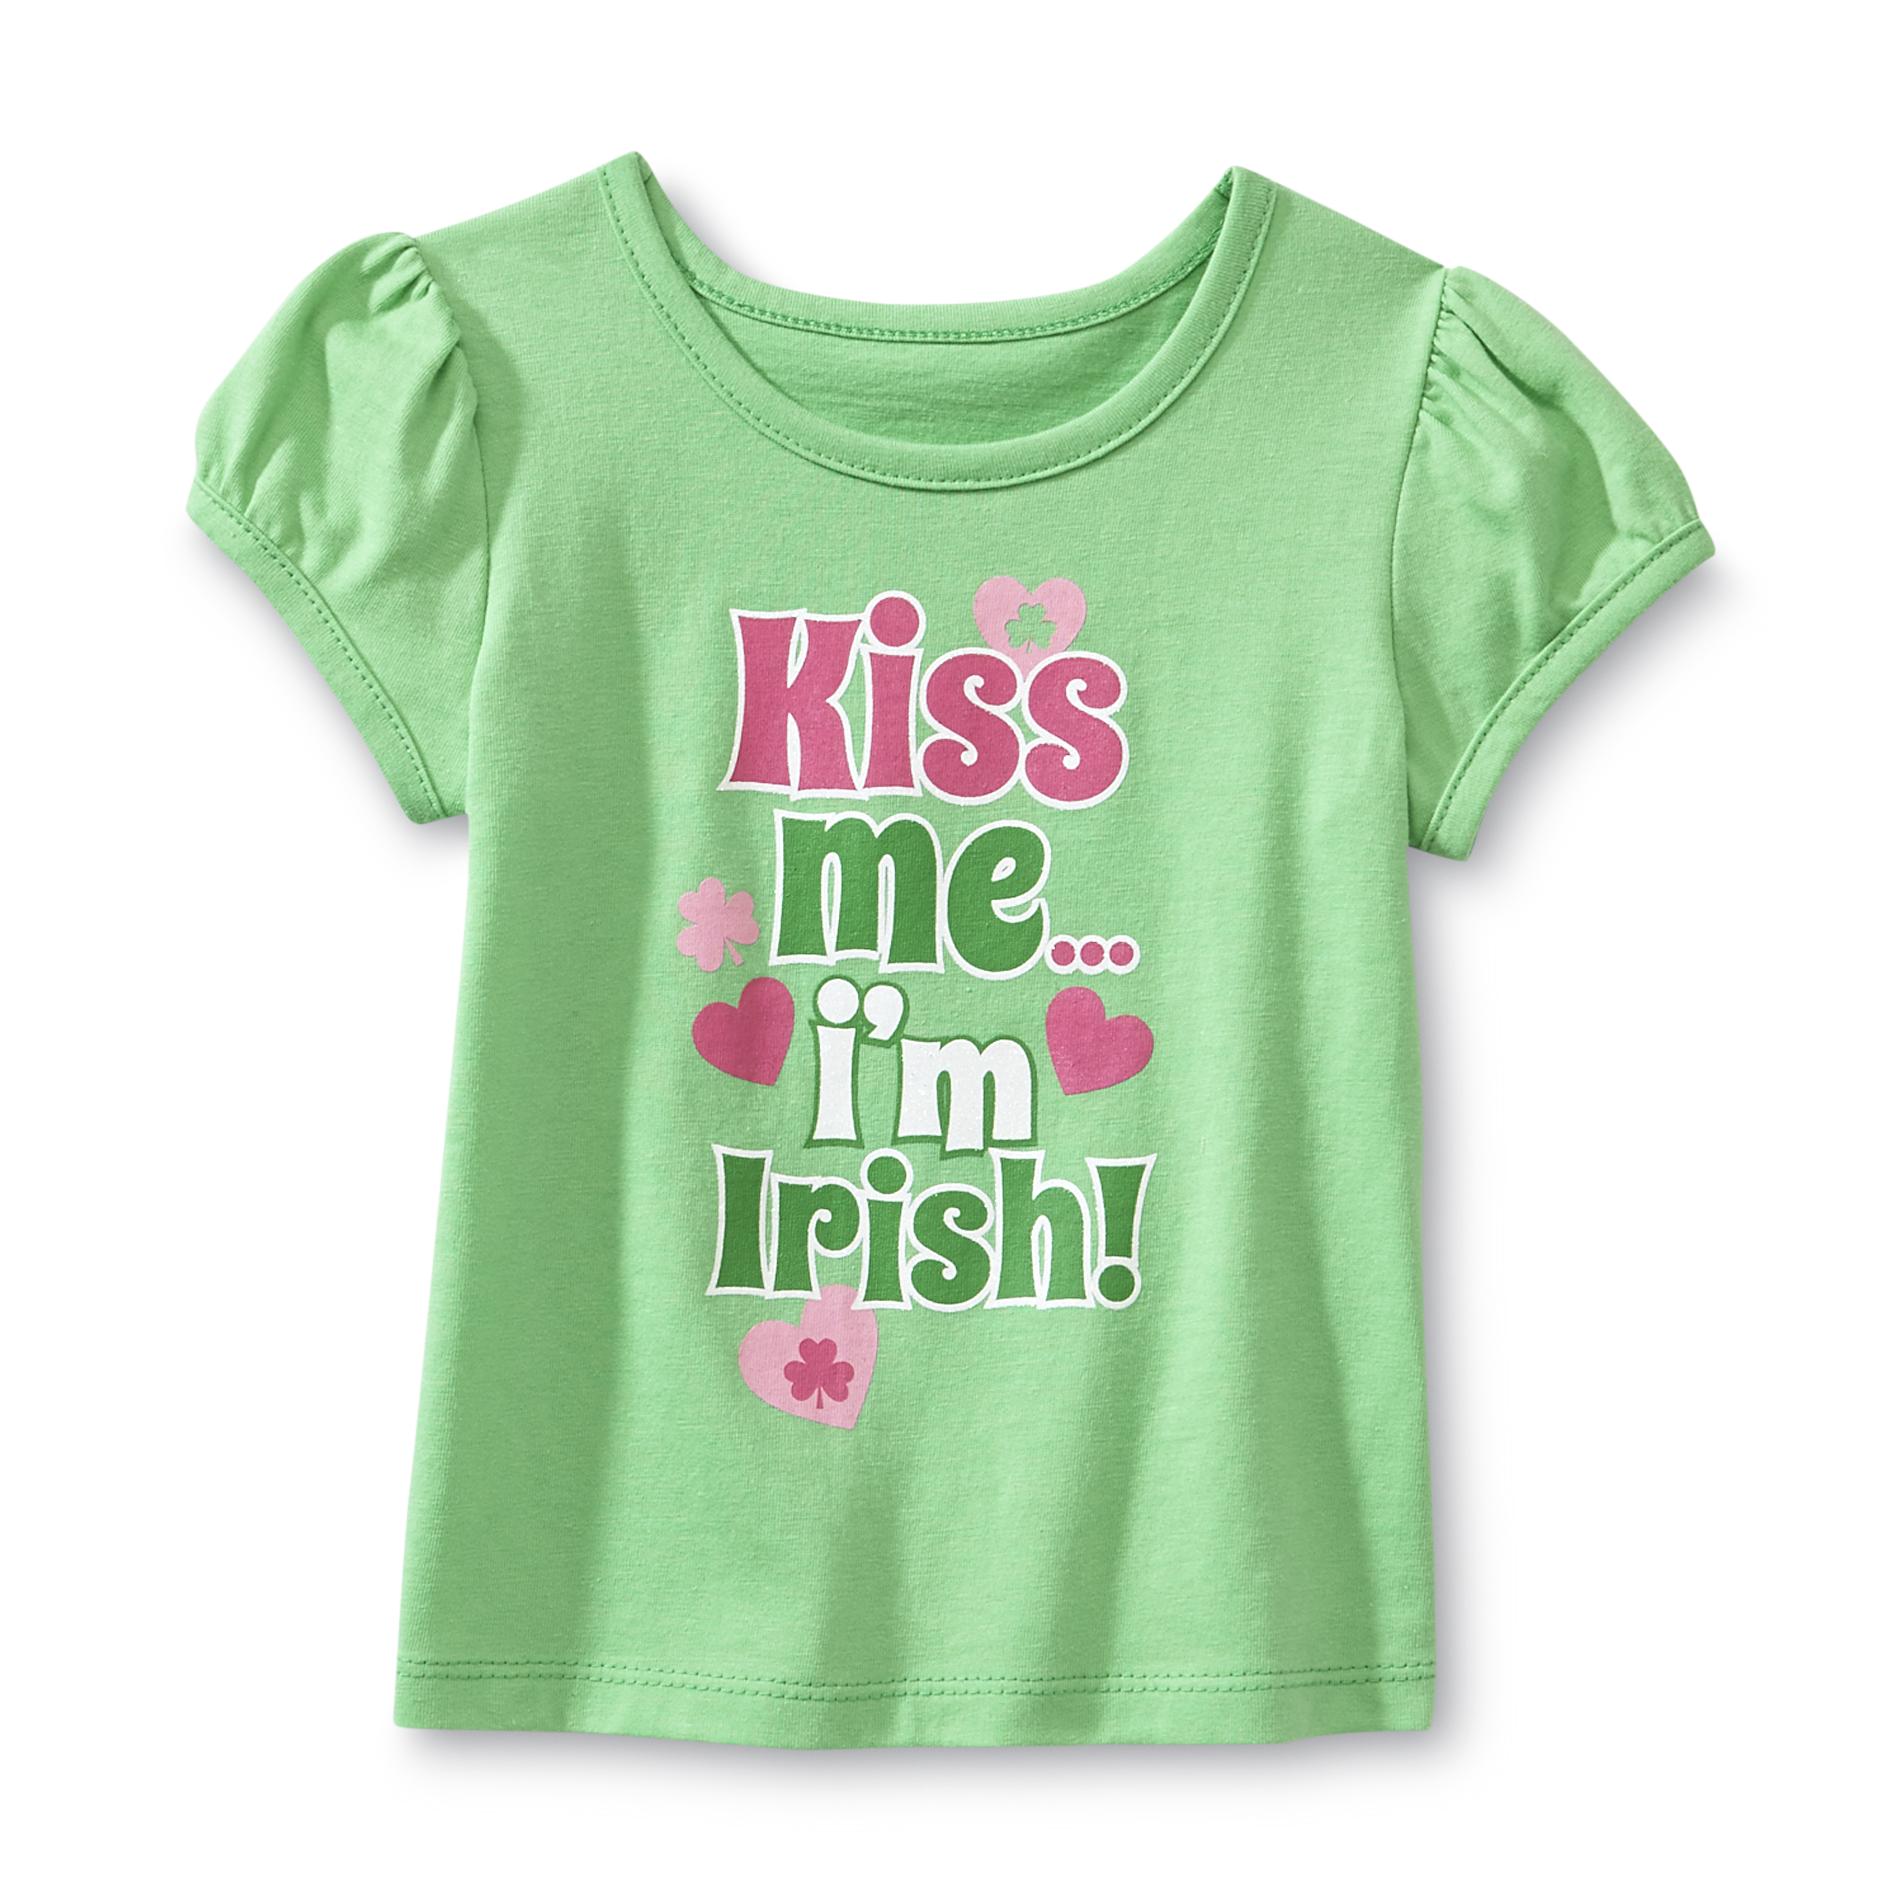 Holiday Editions Infant & Toddler Girl's St. Patrick's Day T-Shirt - Irish Hearts